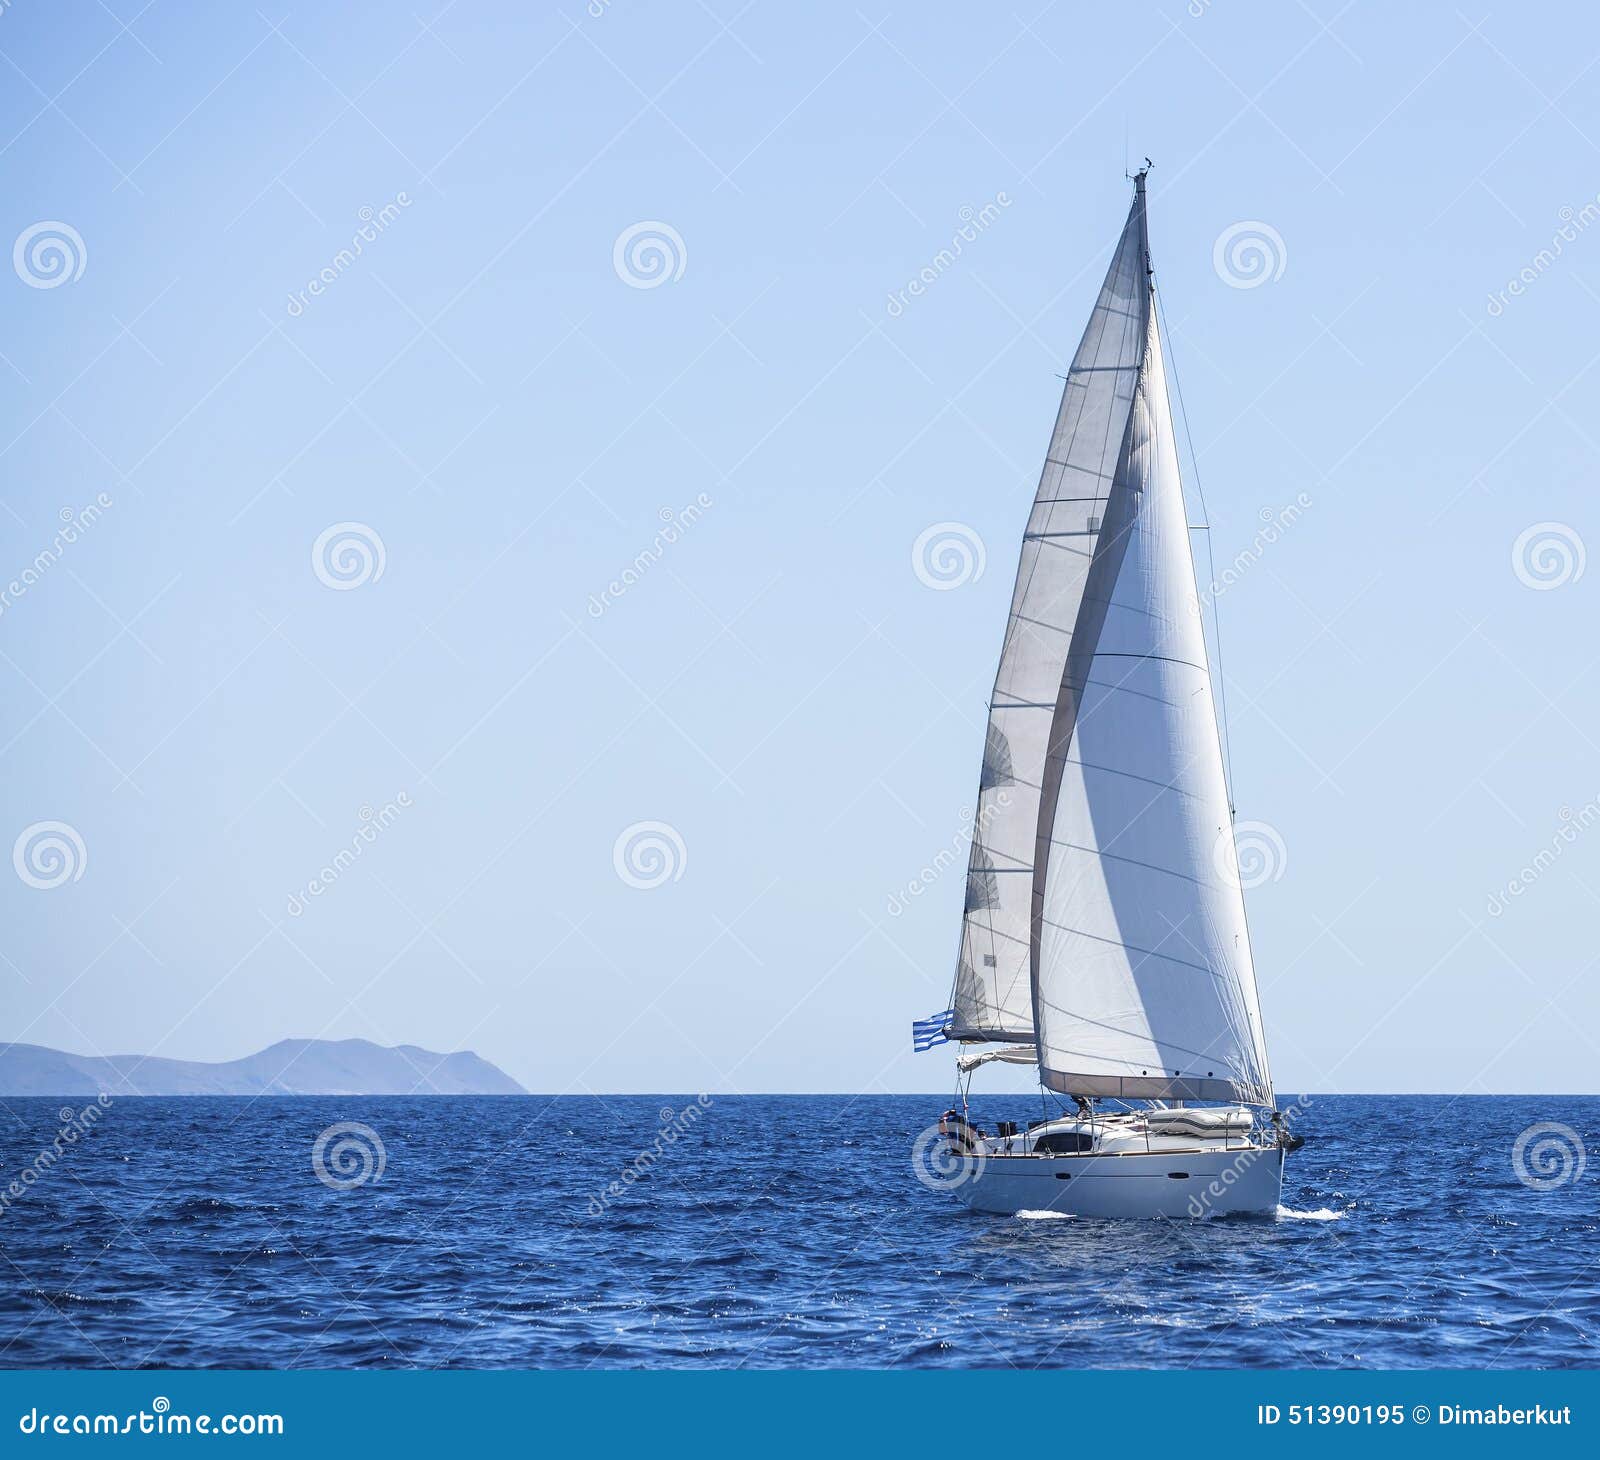 yachting in the mediterranean